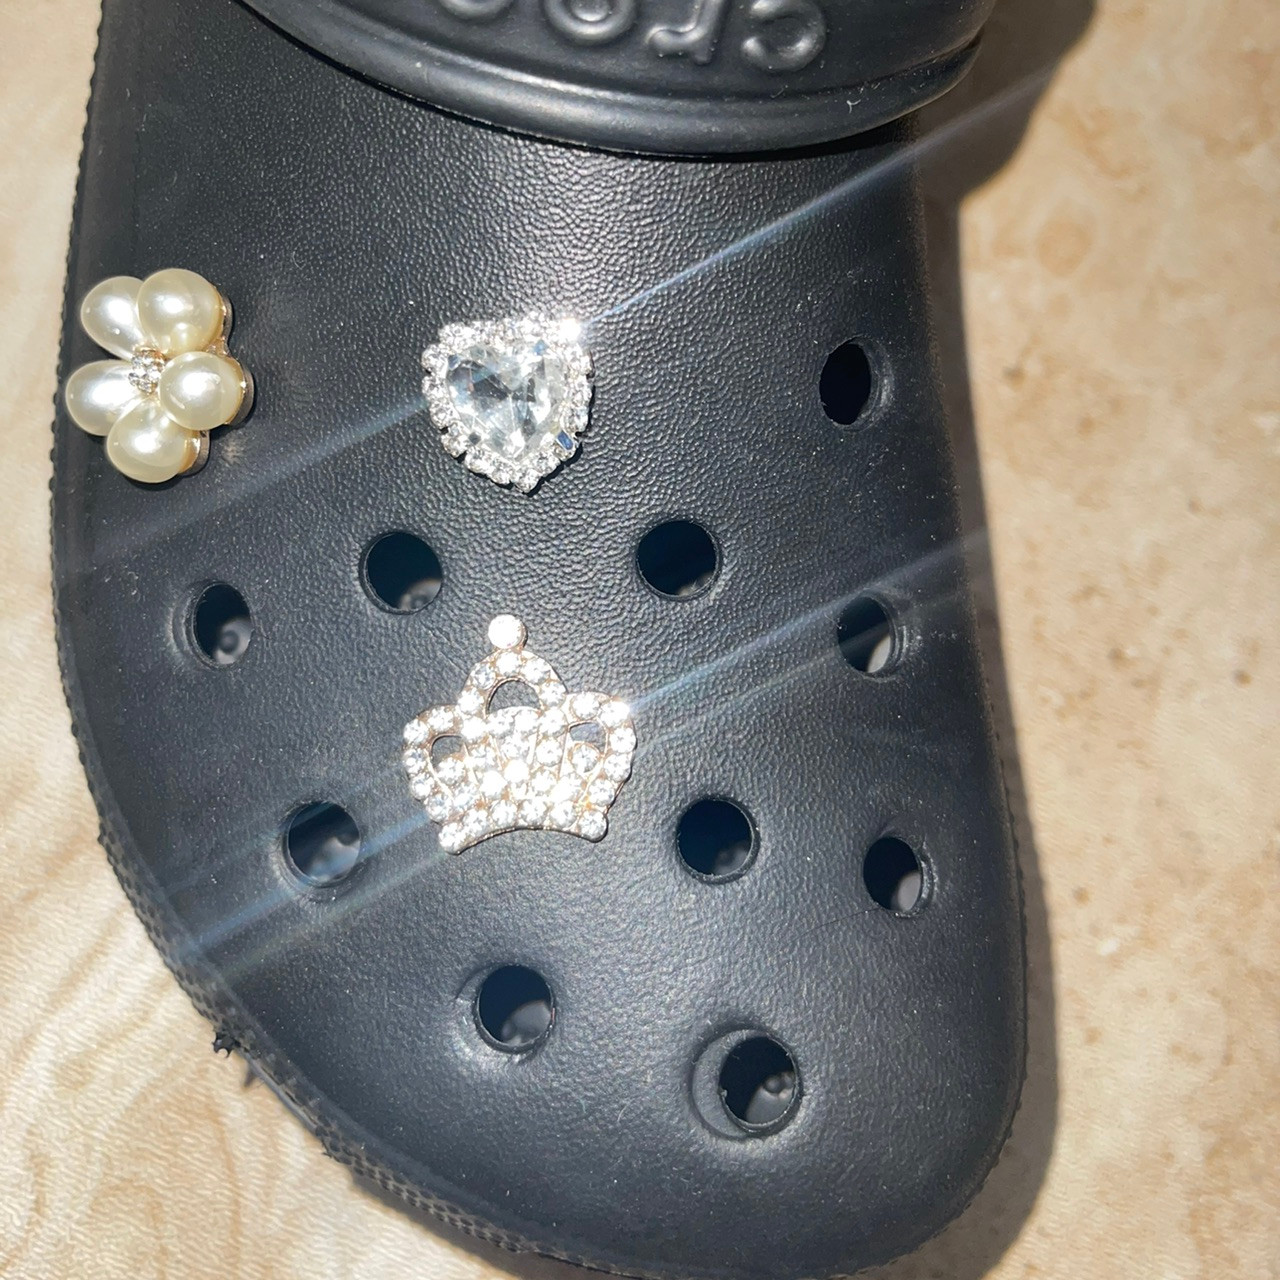 Elite Croc Shoe Charms - Bling Croc Charms - Bling Queen Crown Charm - Bling  Heart Charm - Pearl Flower